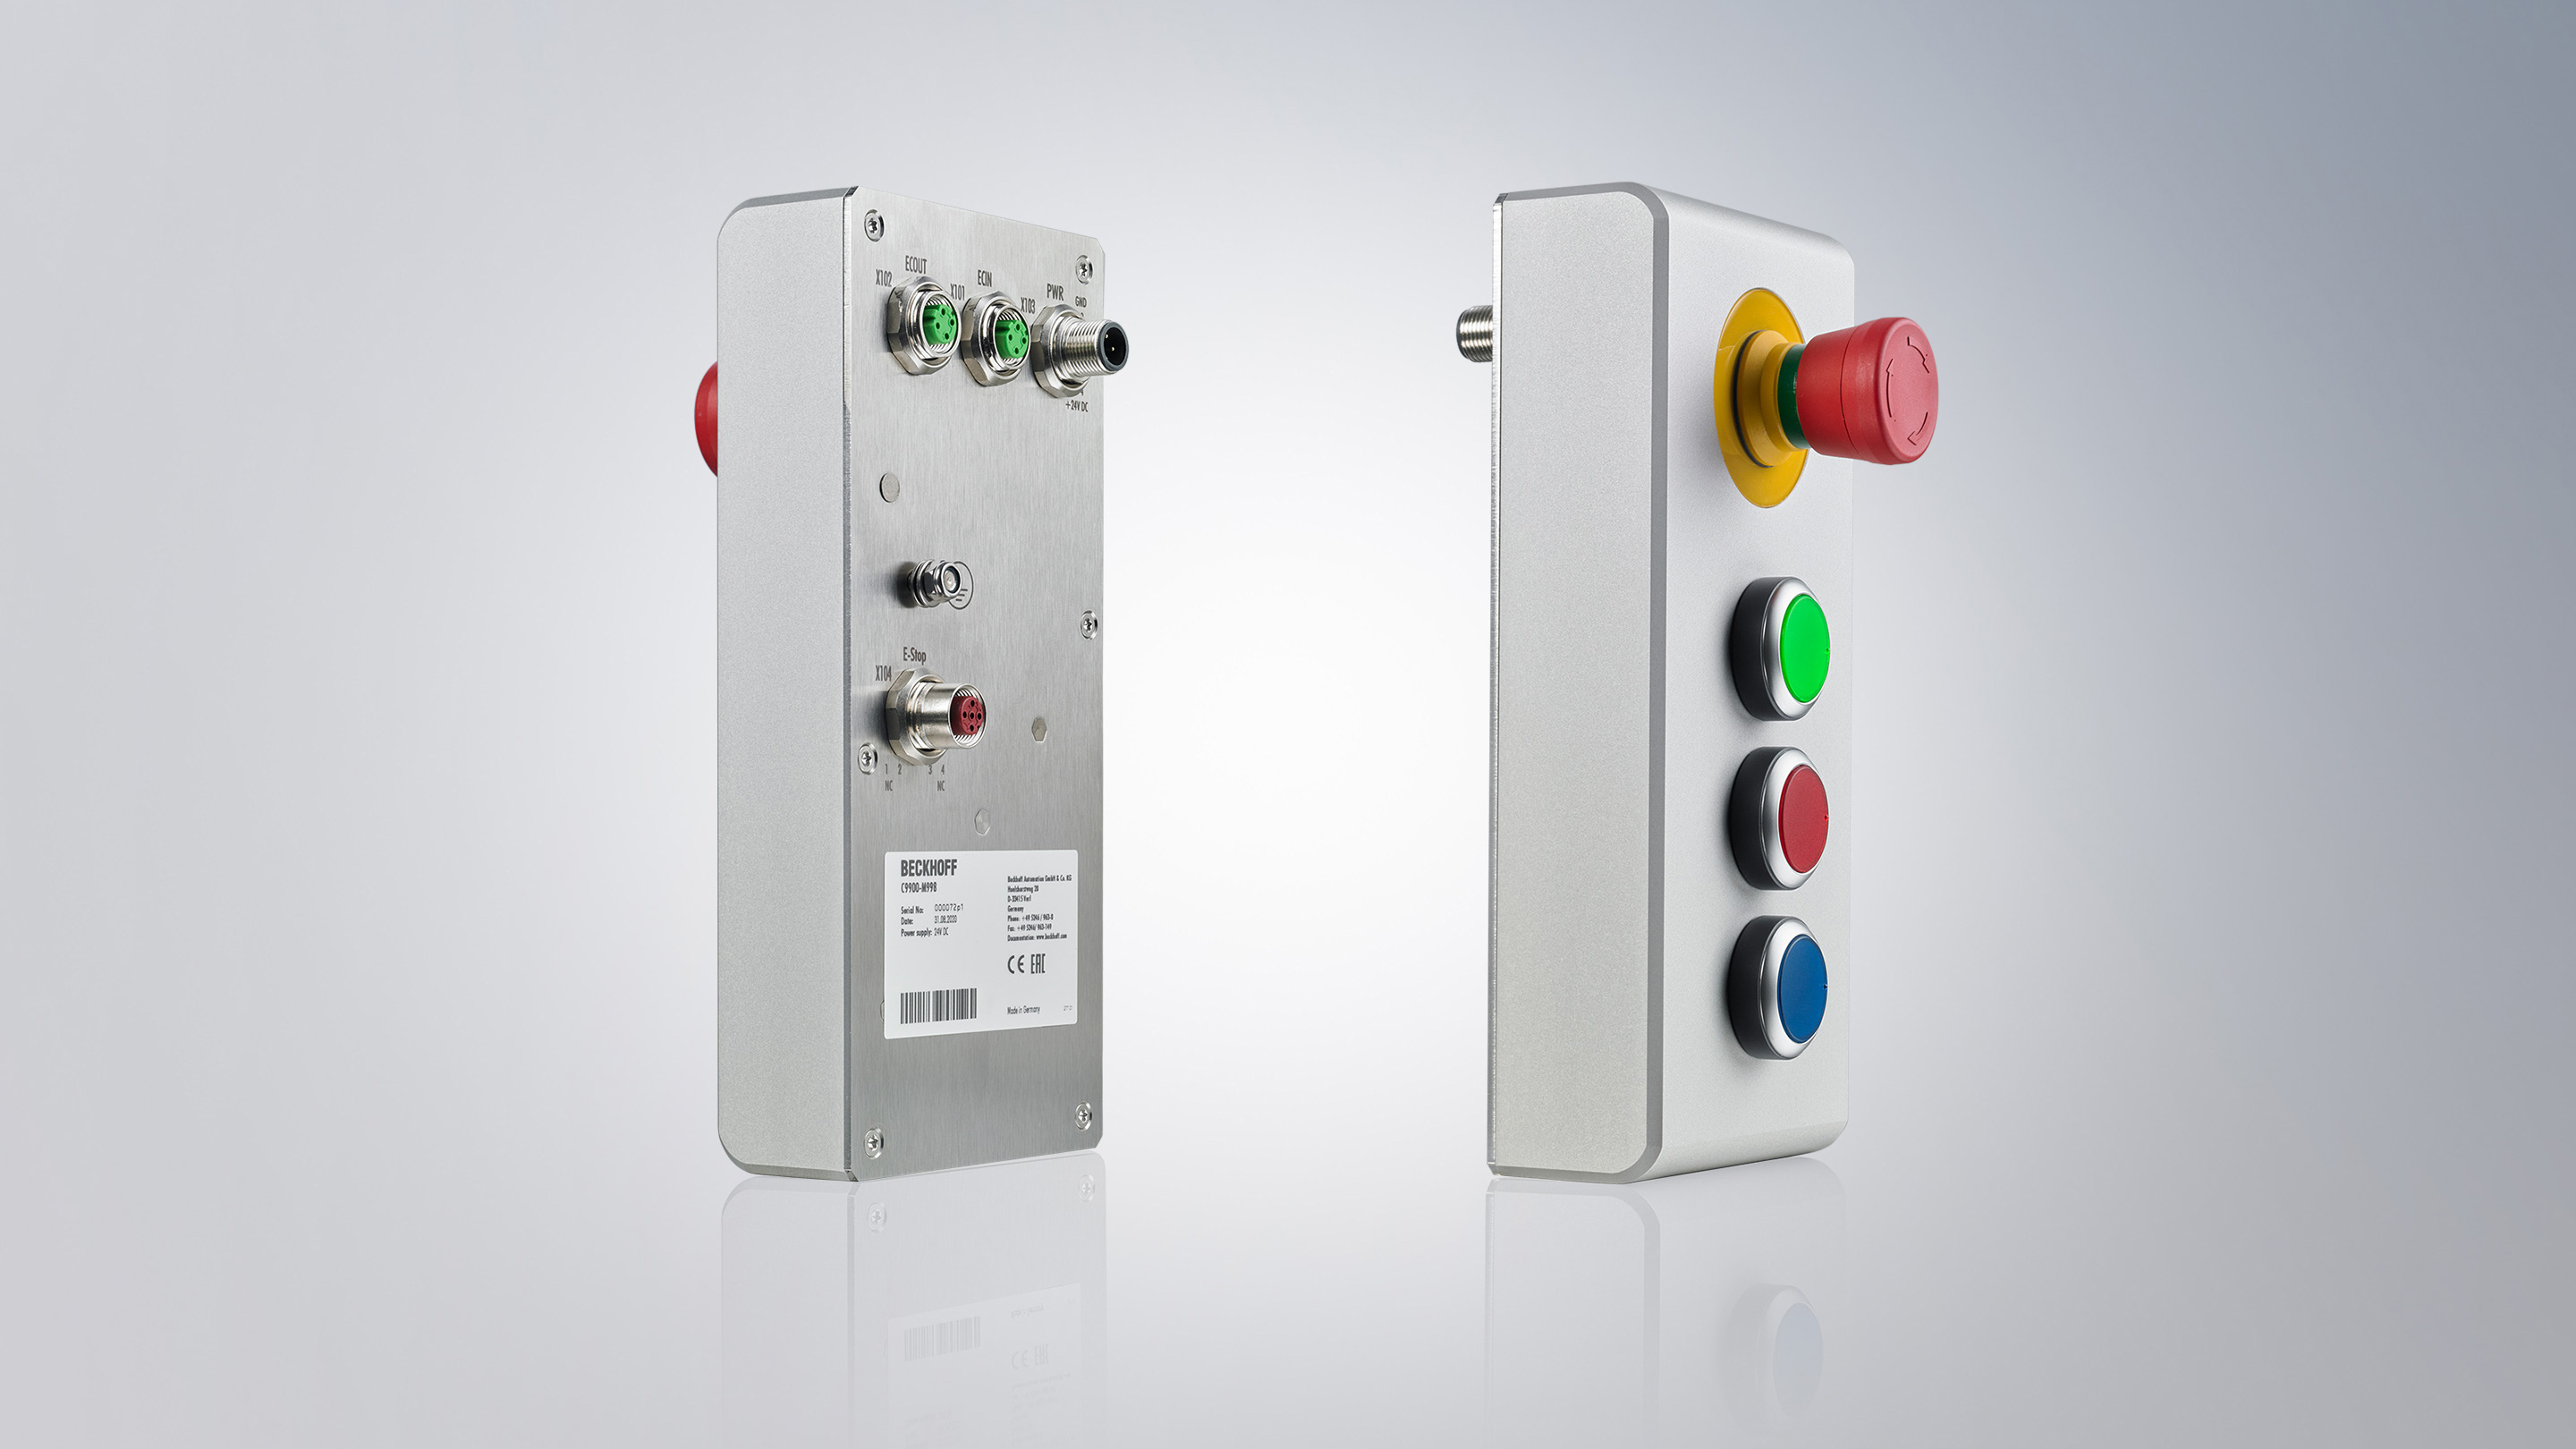 C9900-M998: 4-part add-on push button module in IP65 design, emergency stop button and three illuminated buttons with EtherCAT connection 